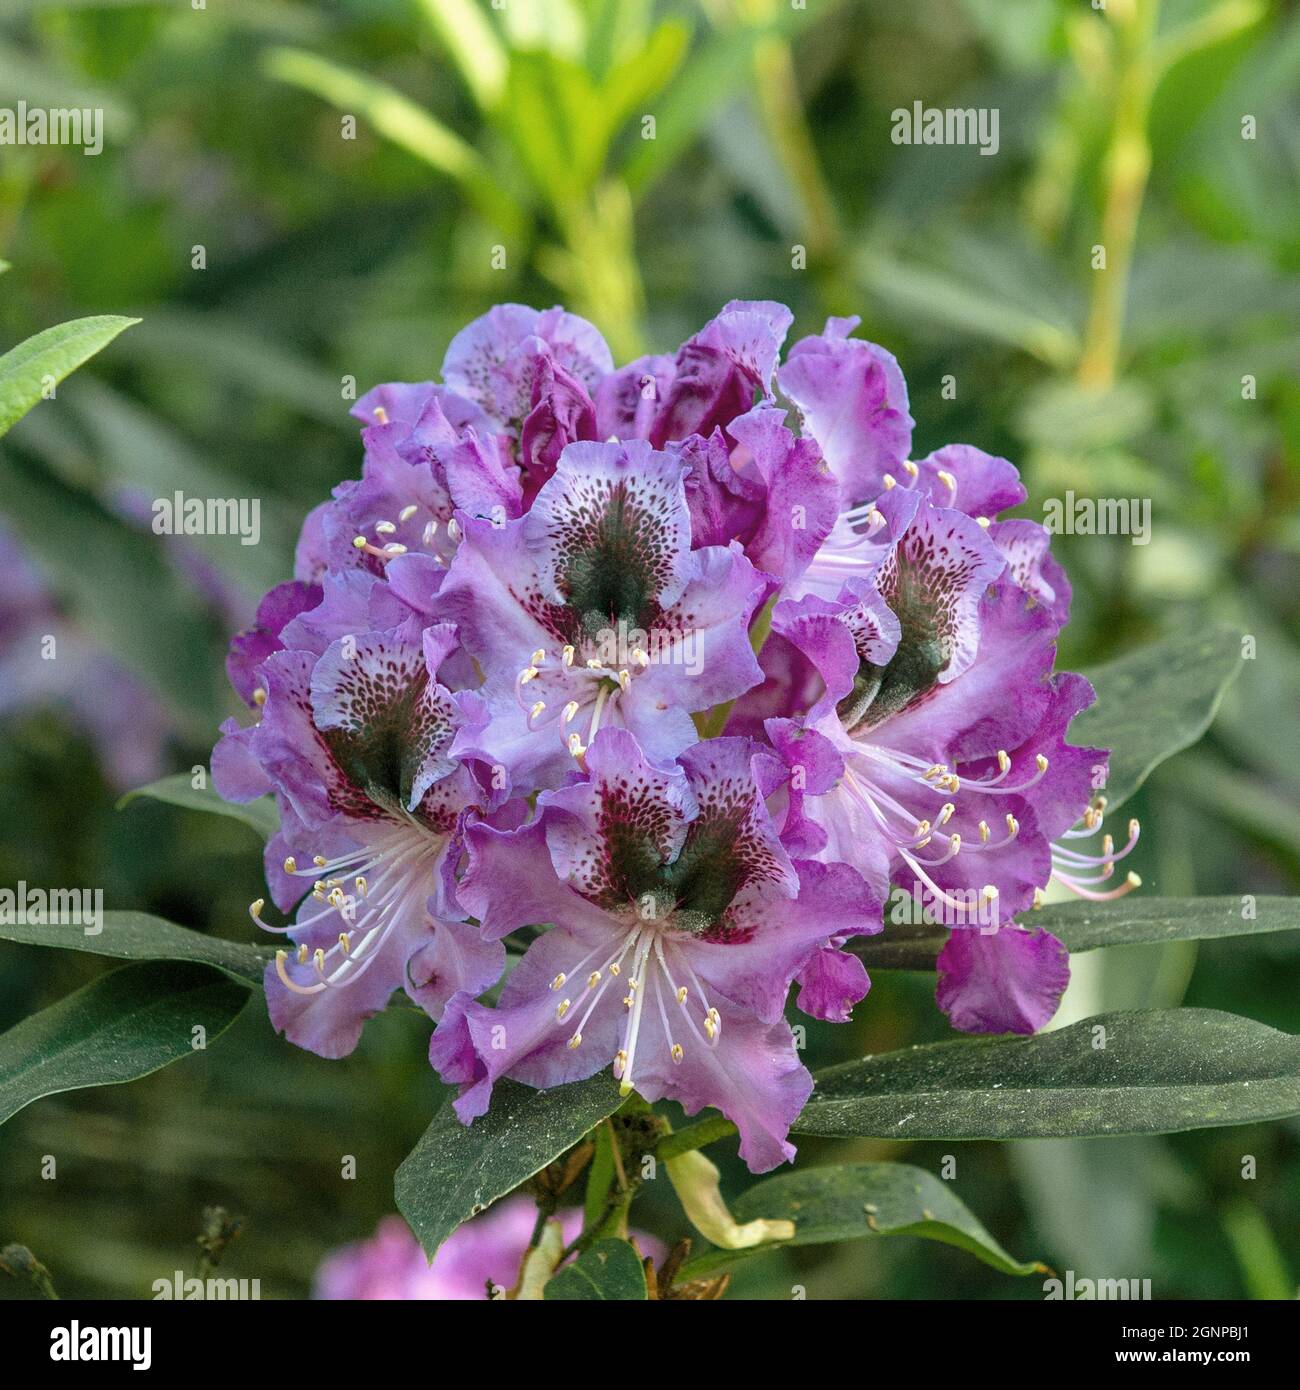 rhododendron (Rhododendron 'Blaue Jungs', Rhododendron Blaue Jungs), flowers of cultivar Blaue Jungs Stock Photo